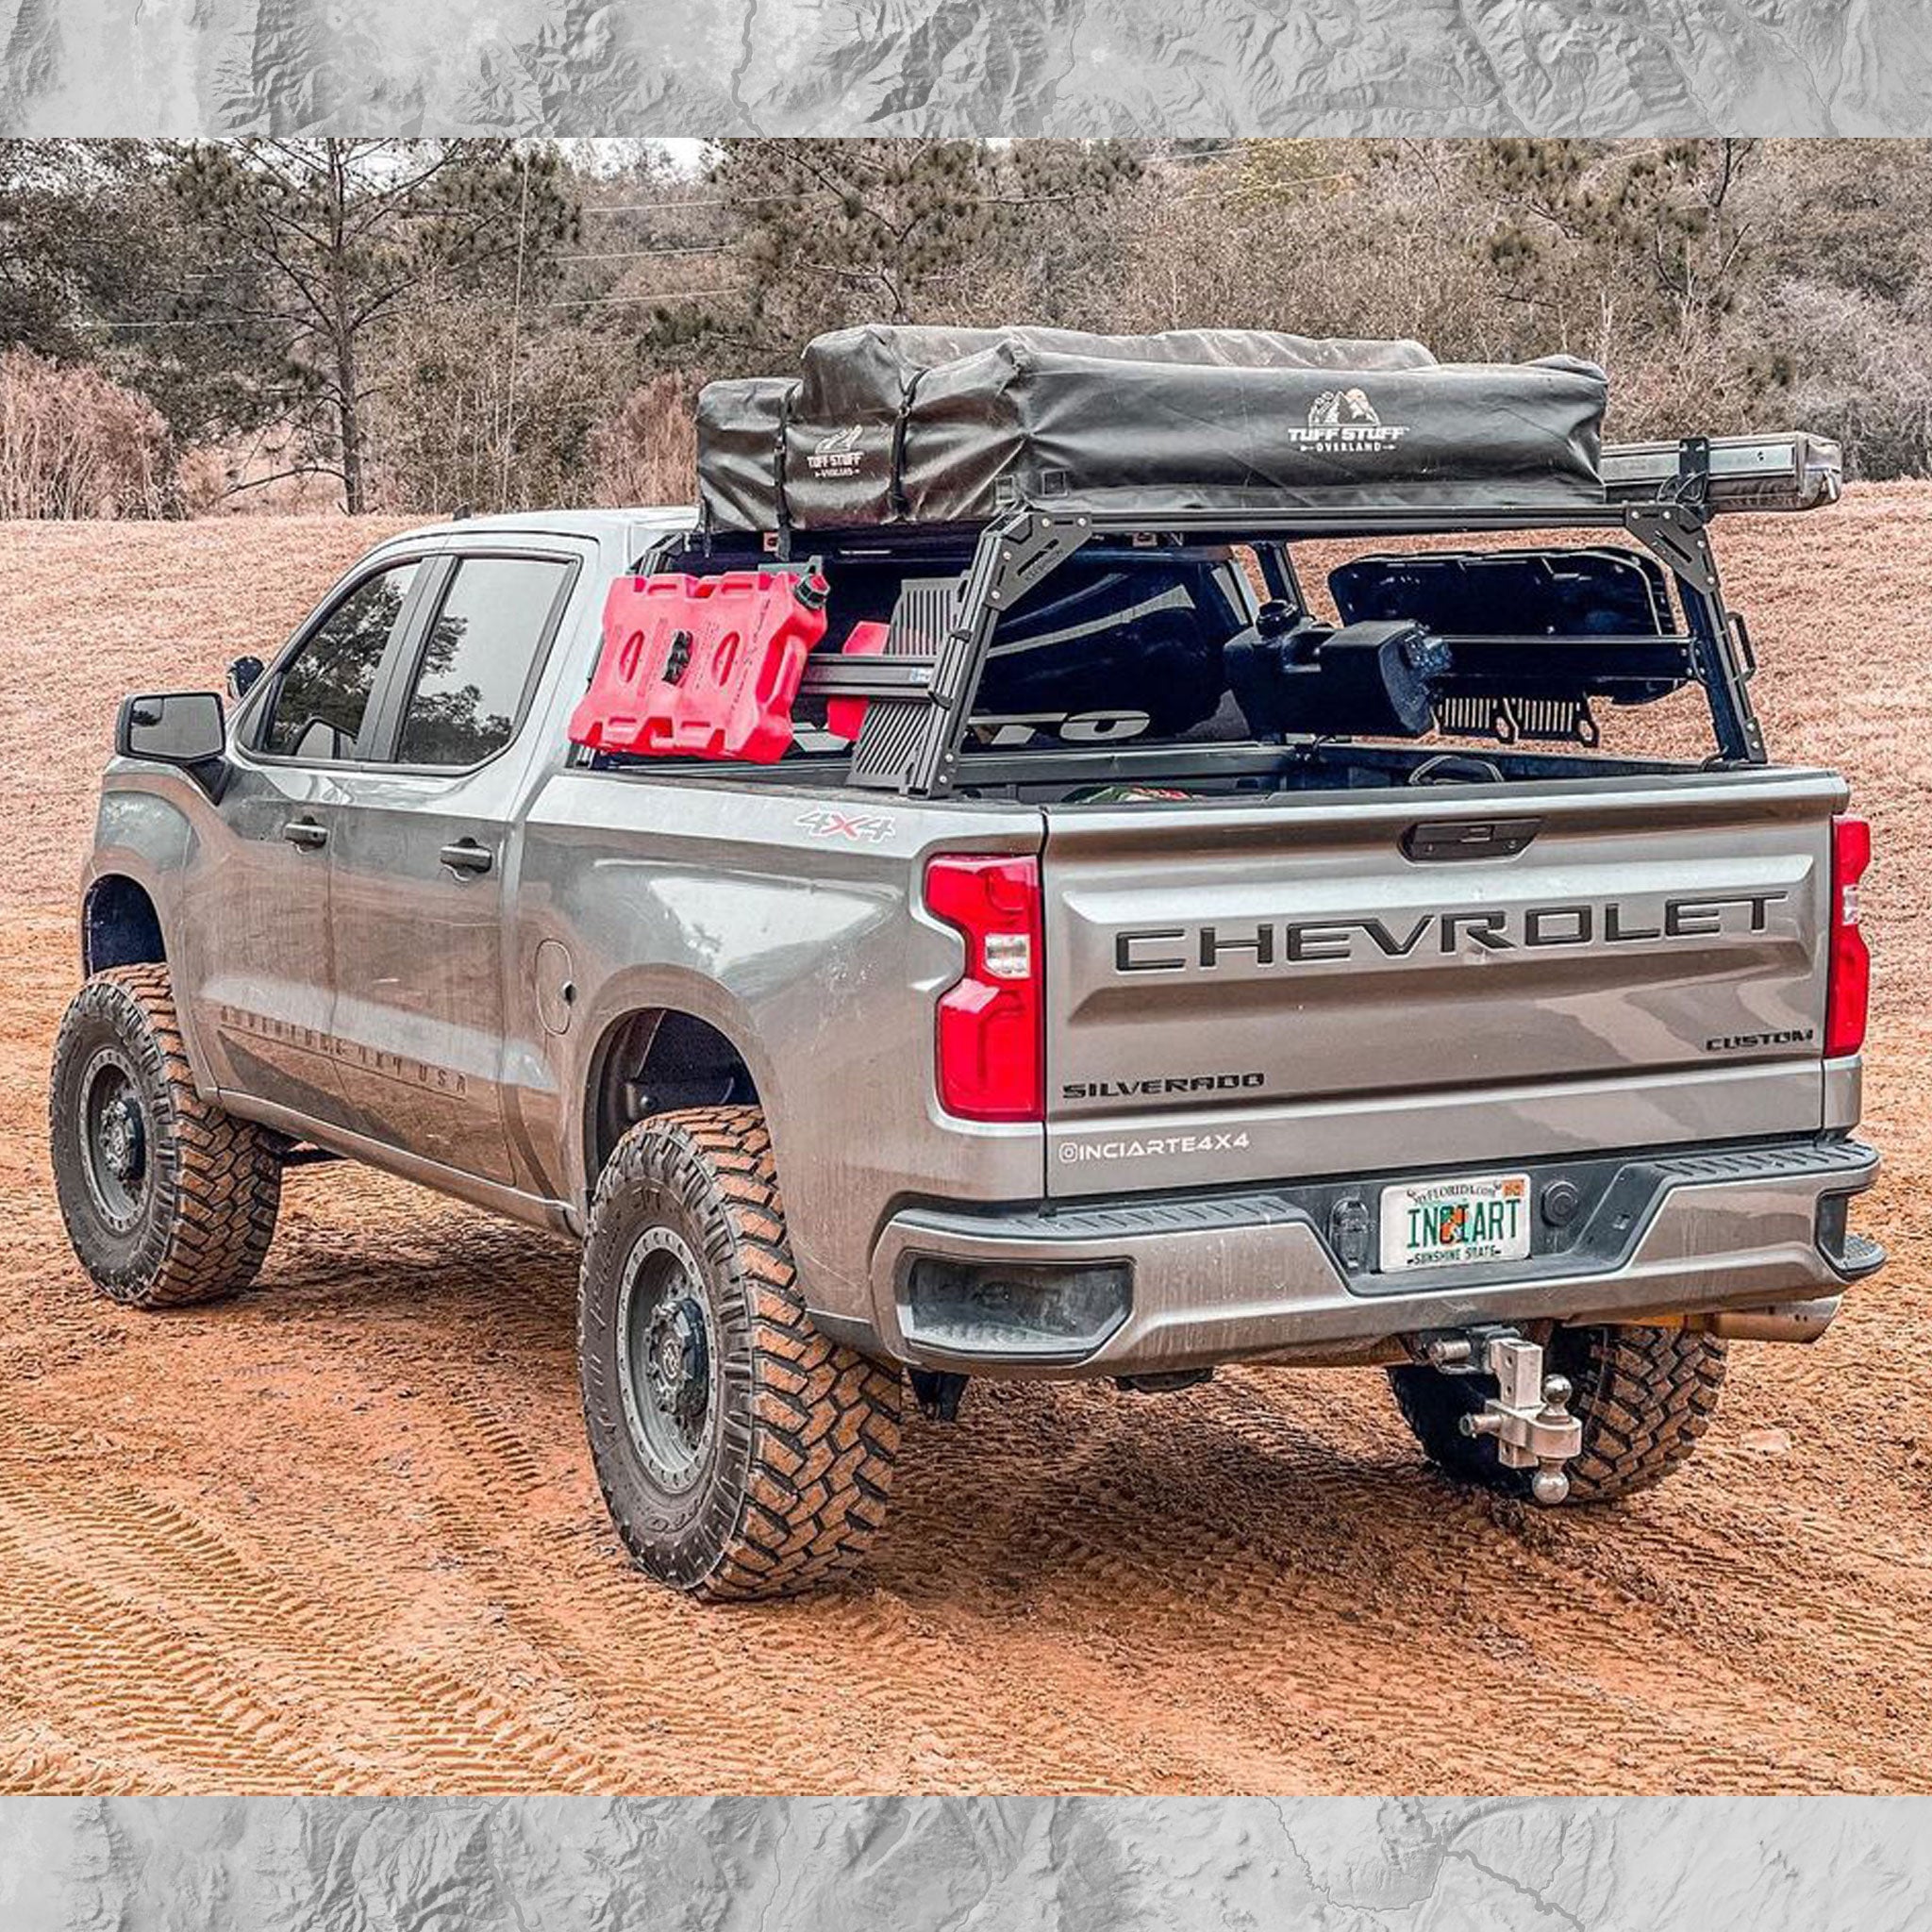 Chevy Silverado with overland bed rack and RTT with RotoPax